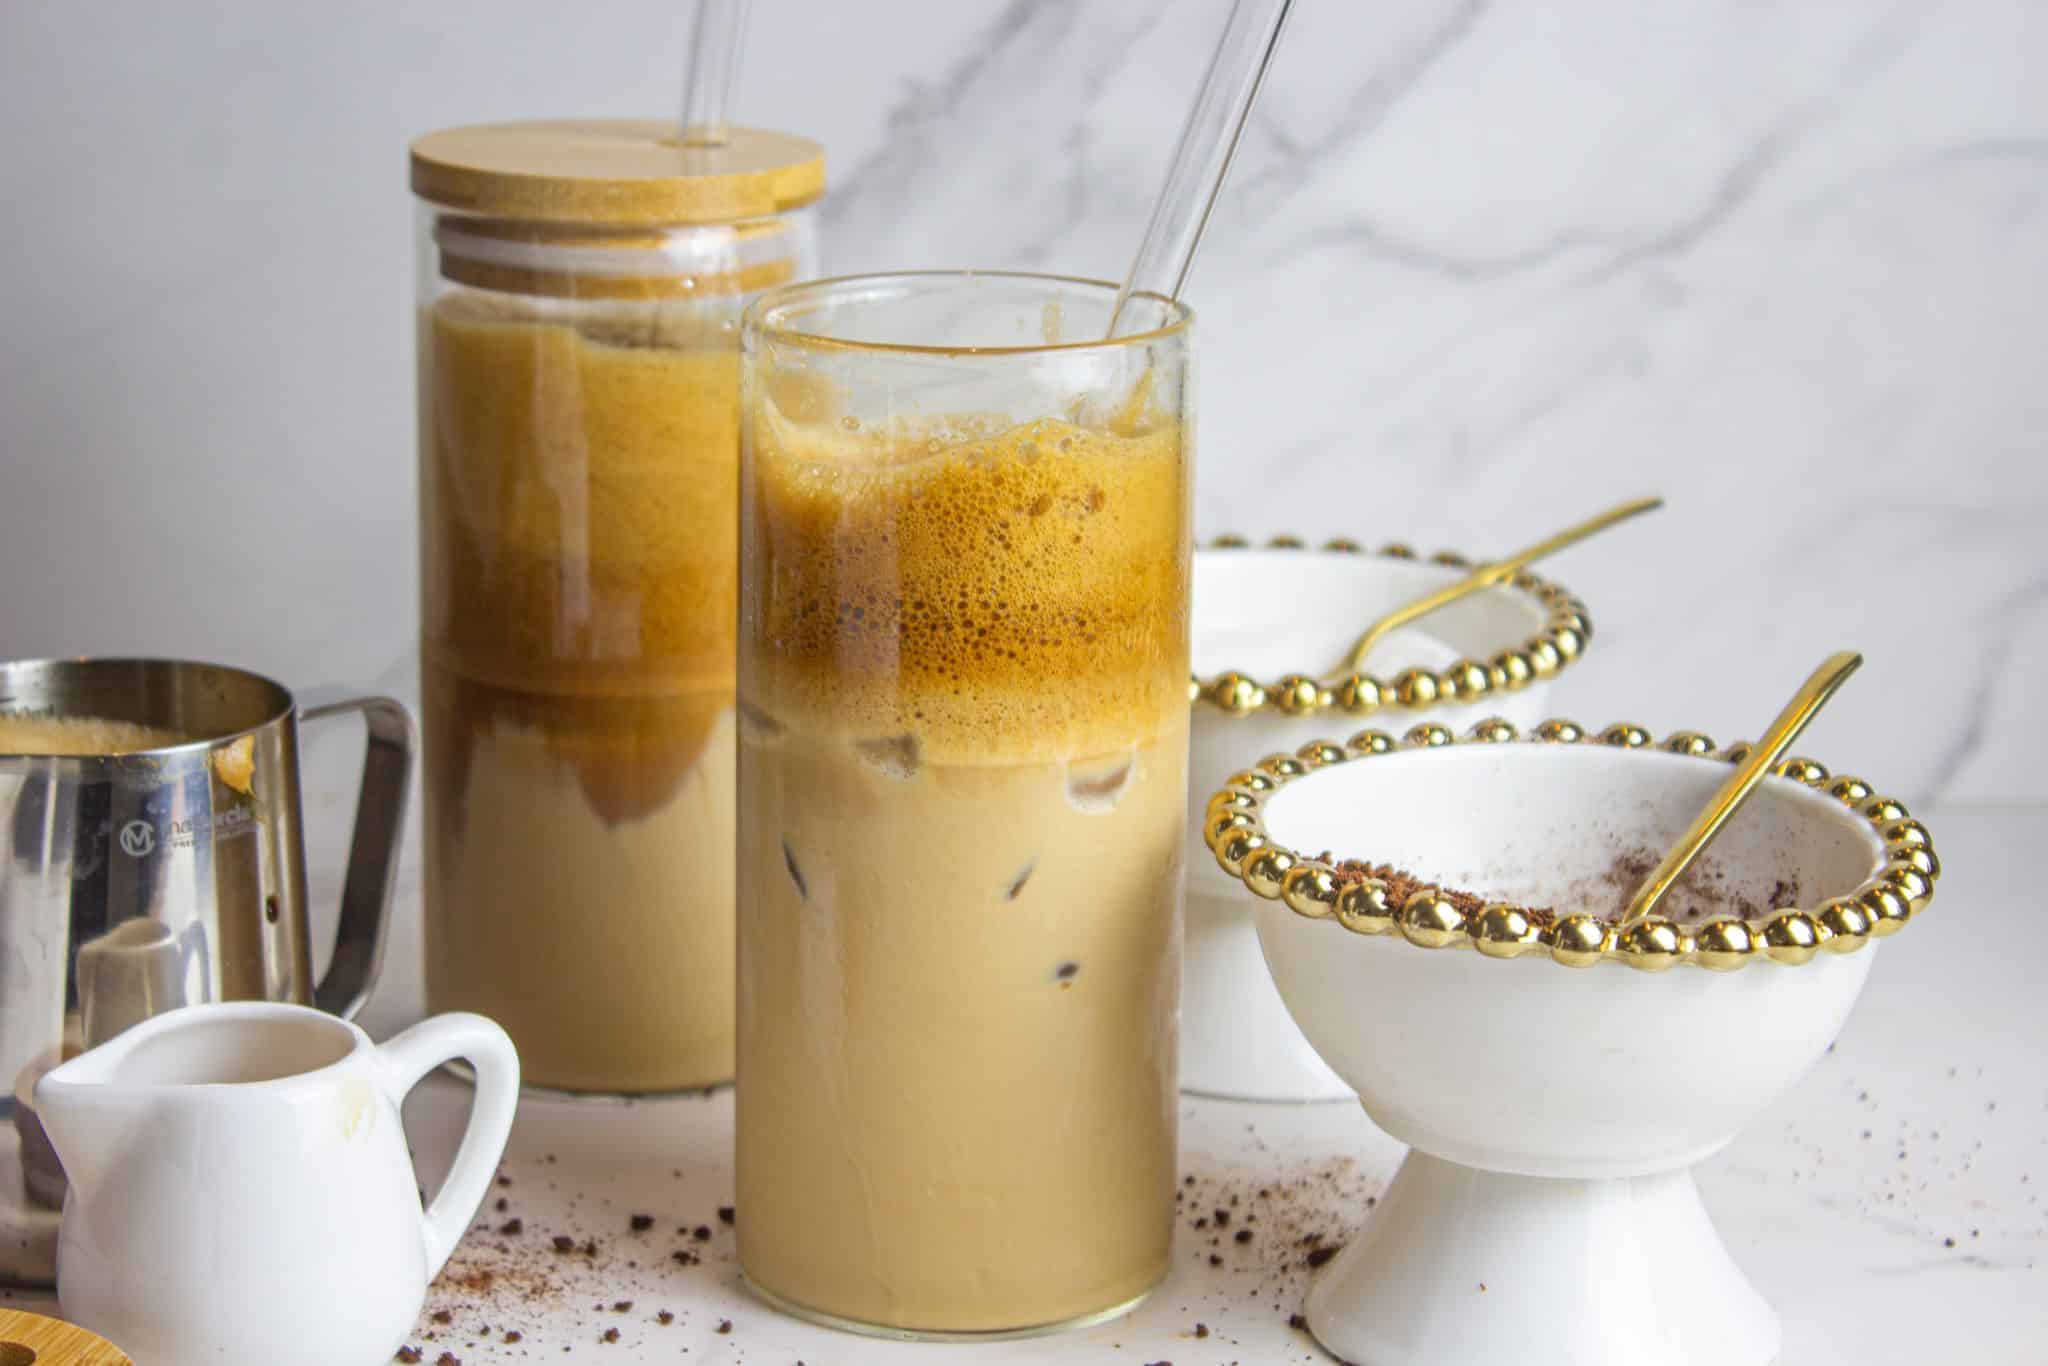 A refreshing glass of instant iced coffee and some flavored syrup for sweetness.